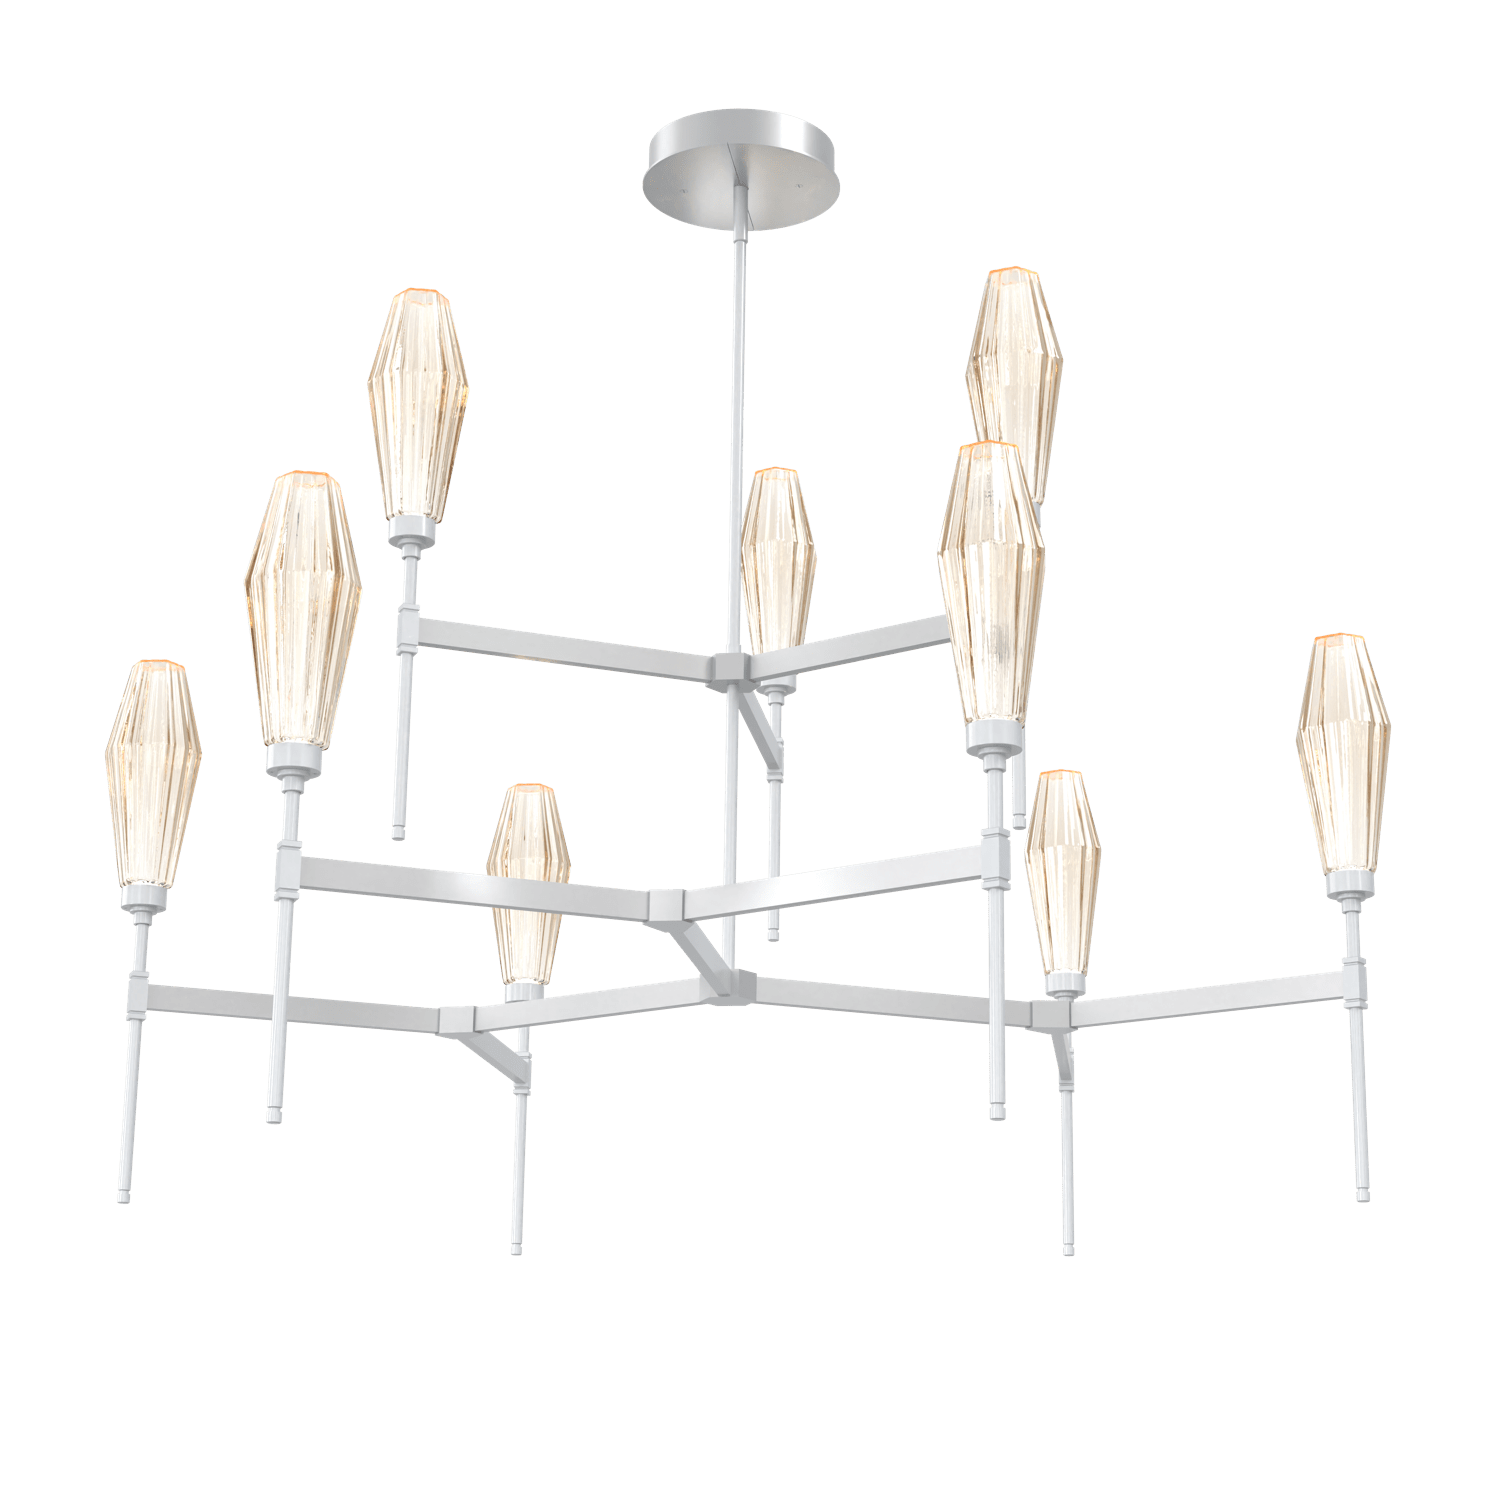 CHB0049-54-CS-RA-Hammerton-Studio-Aalto-54-inch-round-two-tier-belvedere-chandelier-with-classic-silver-finish-and-optic-ribbed-amber-glass-shades-and-LED-lamping